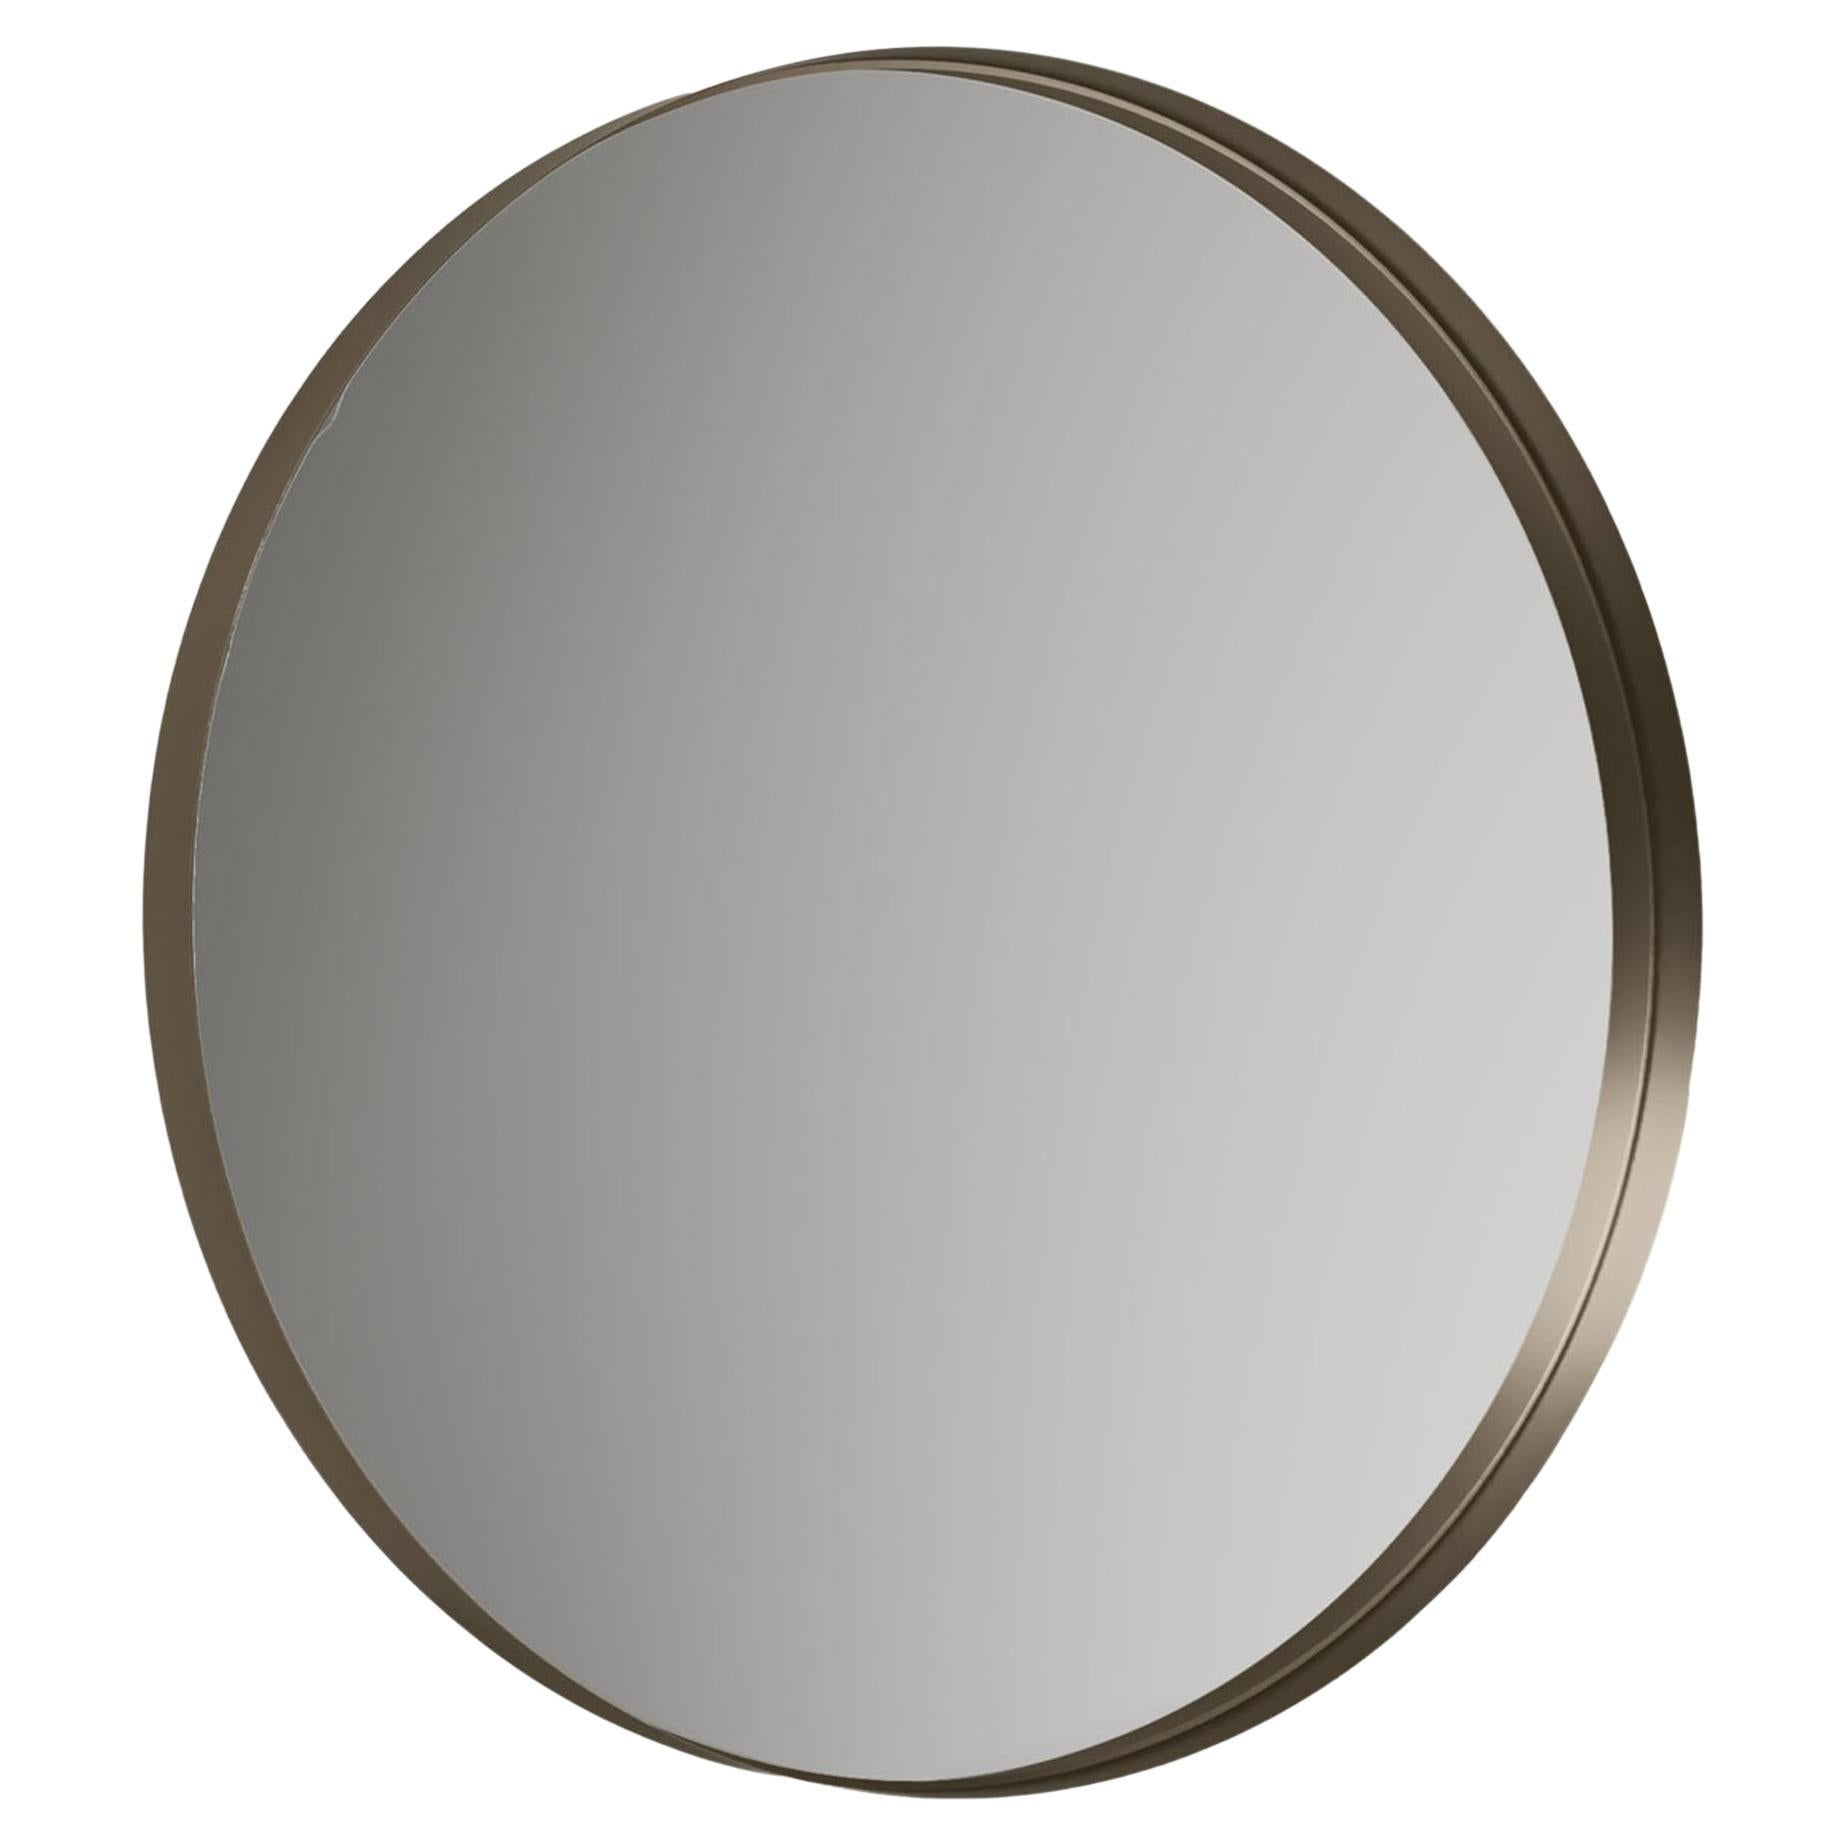 Ron Round Wall Mirror For Sale